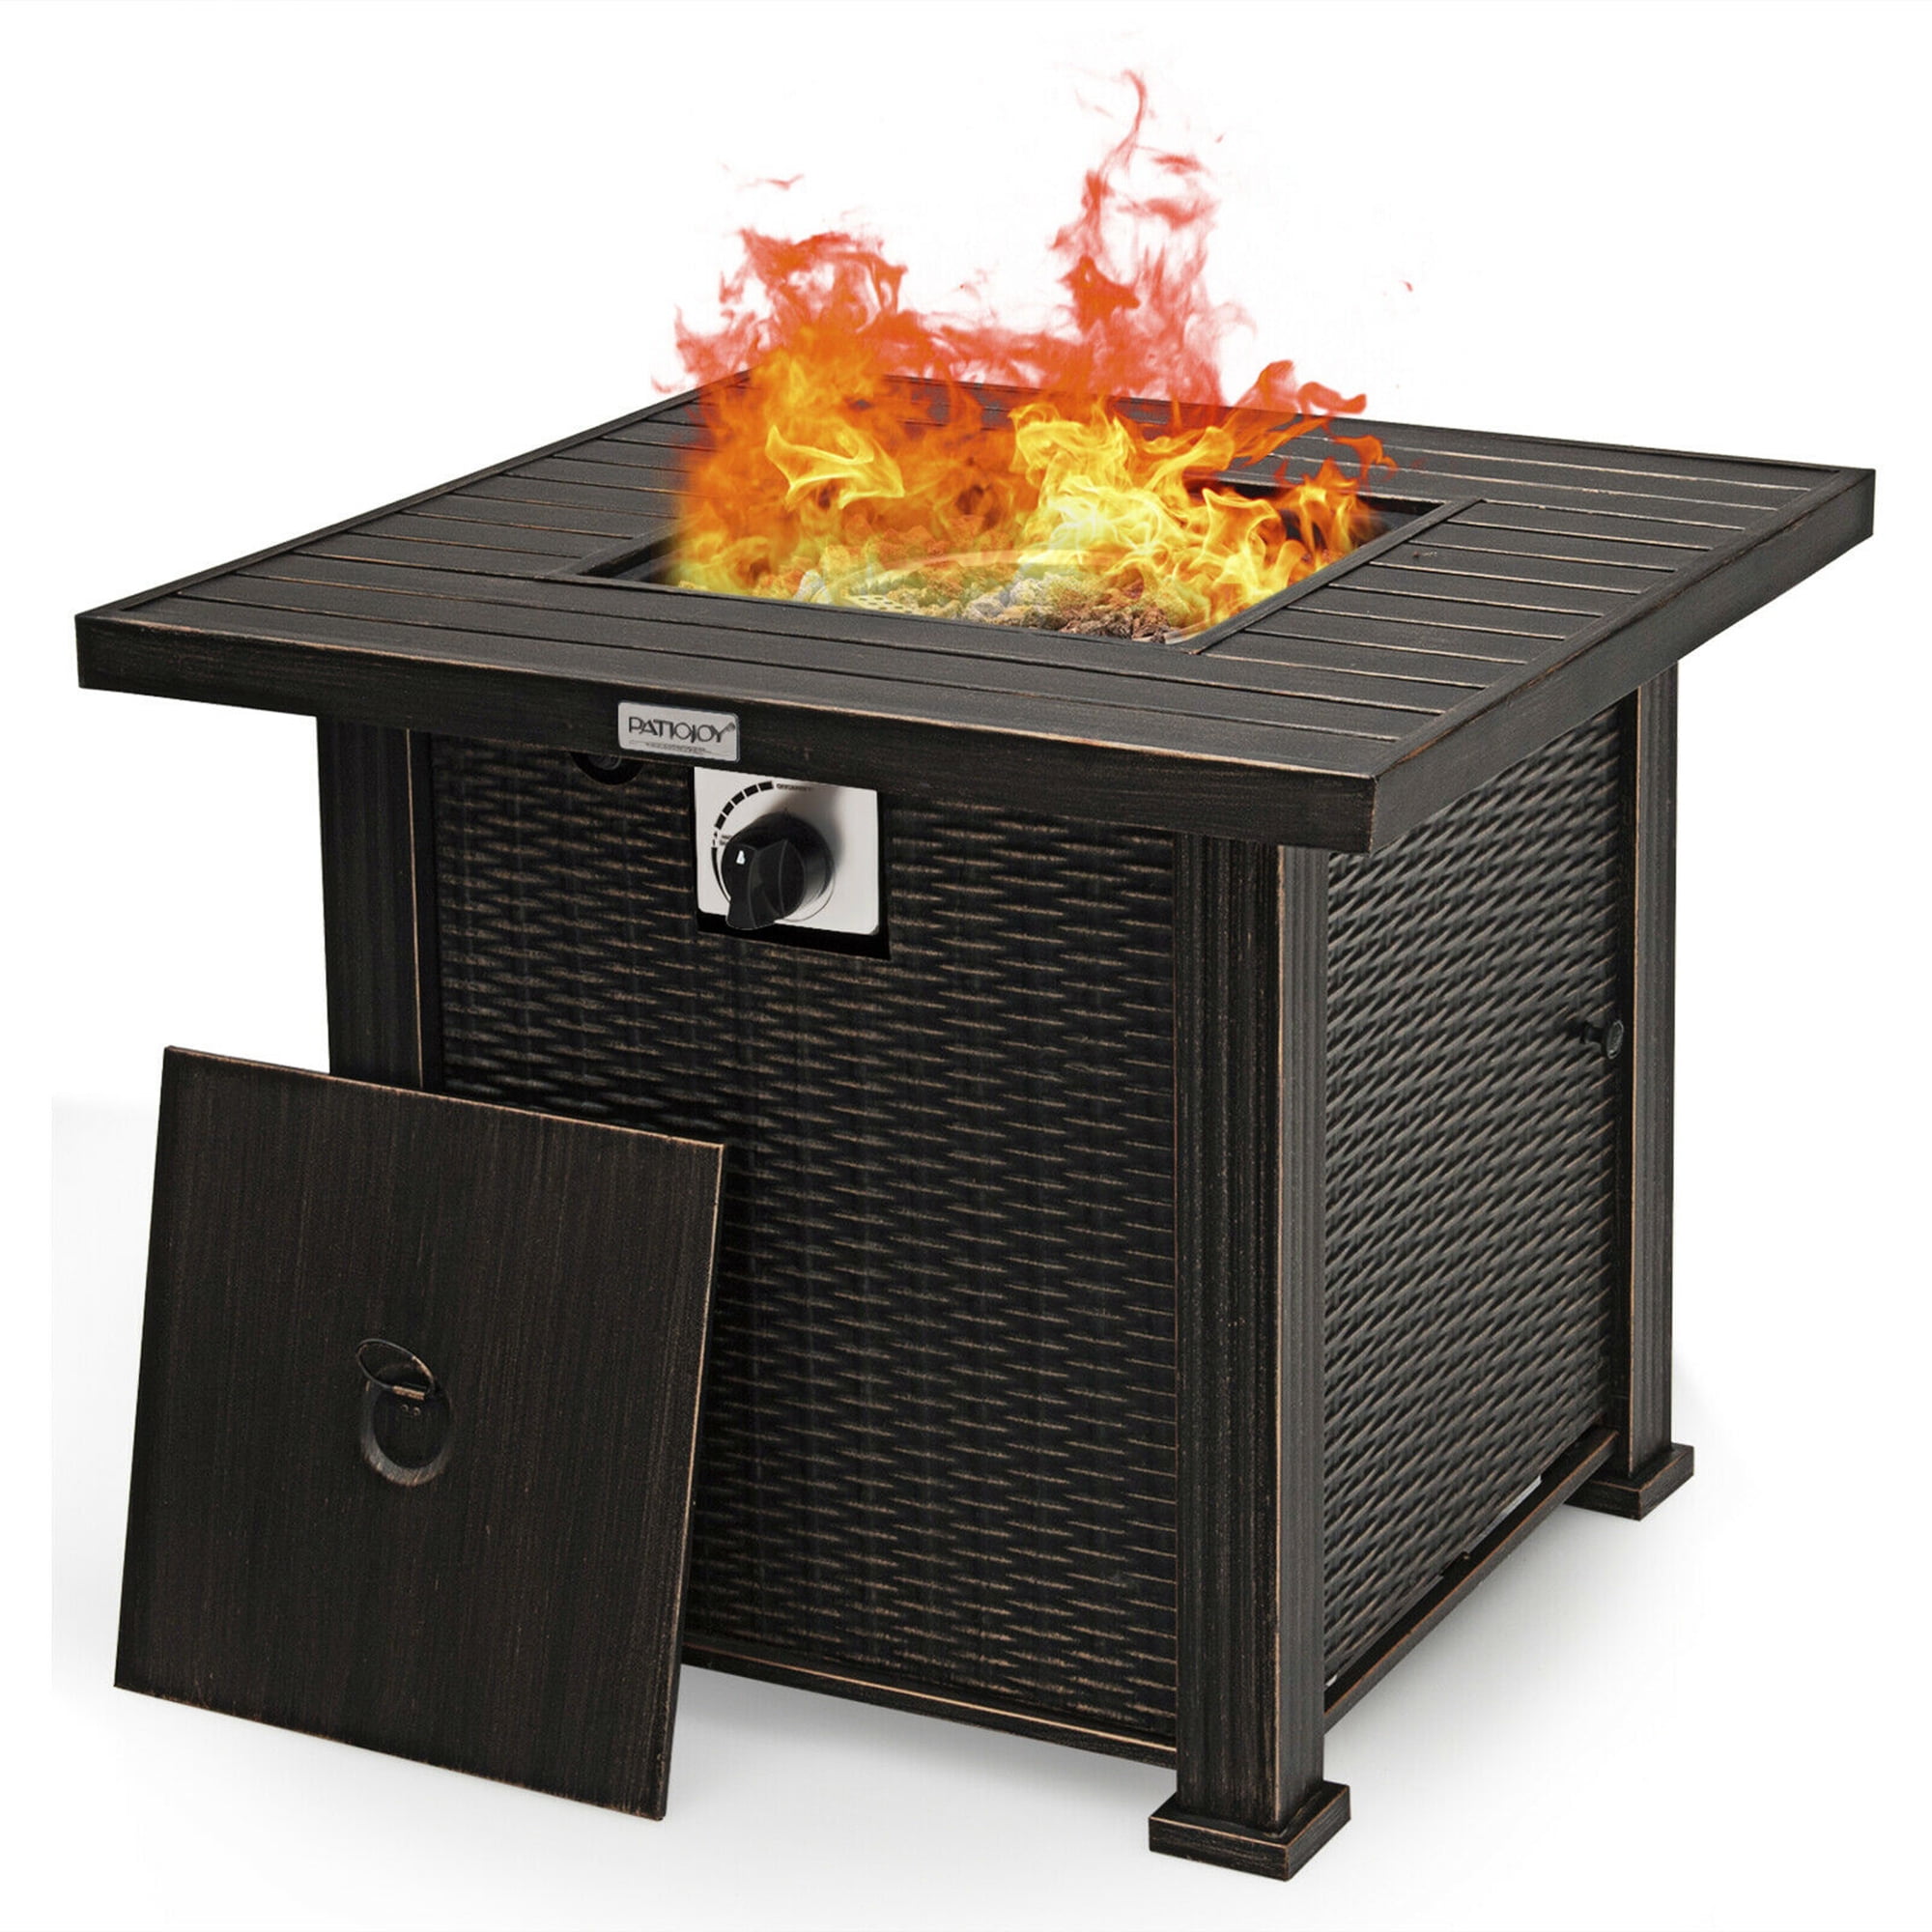 Gymax 30 Gas Fire Pit Table 50 000 Btu, How Many Btu Do I Need For A Fire Pit